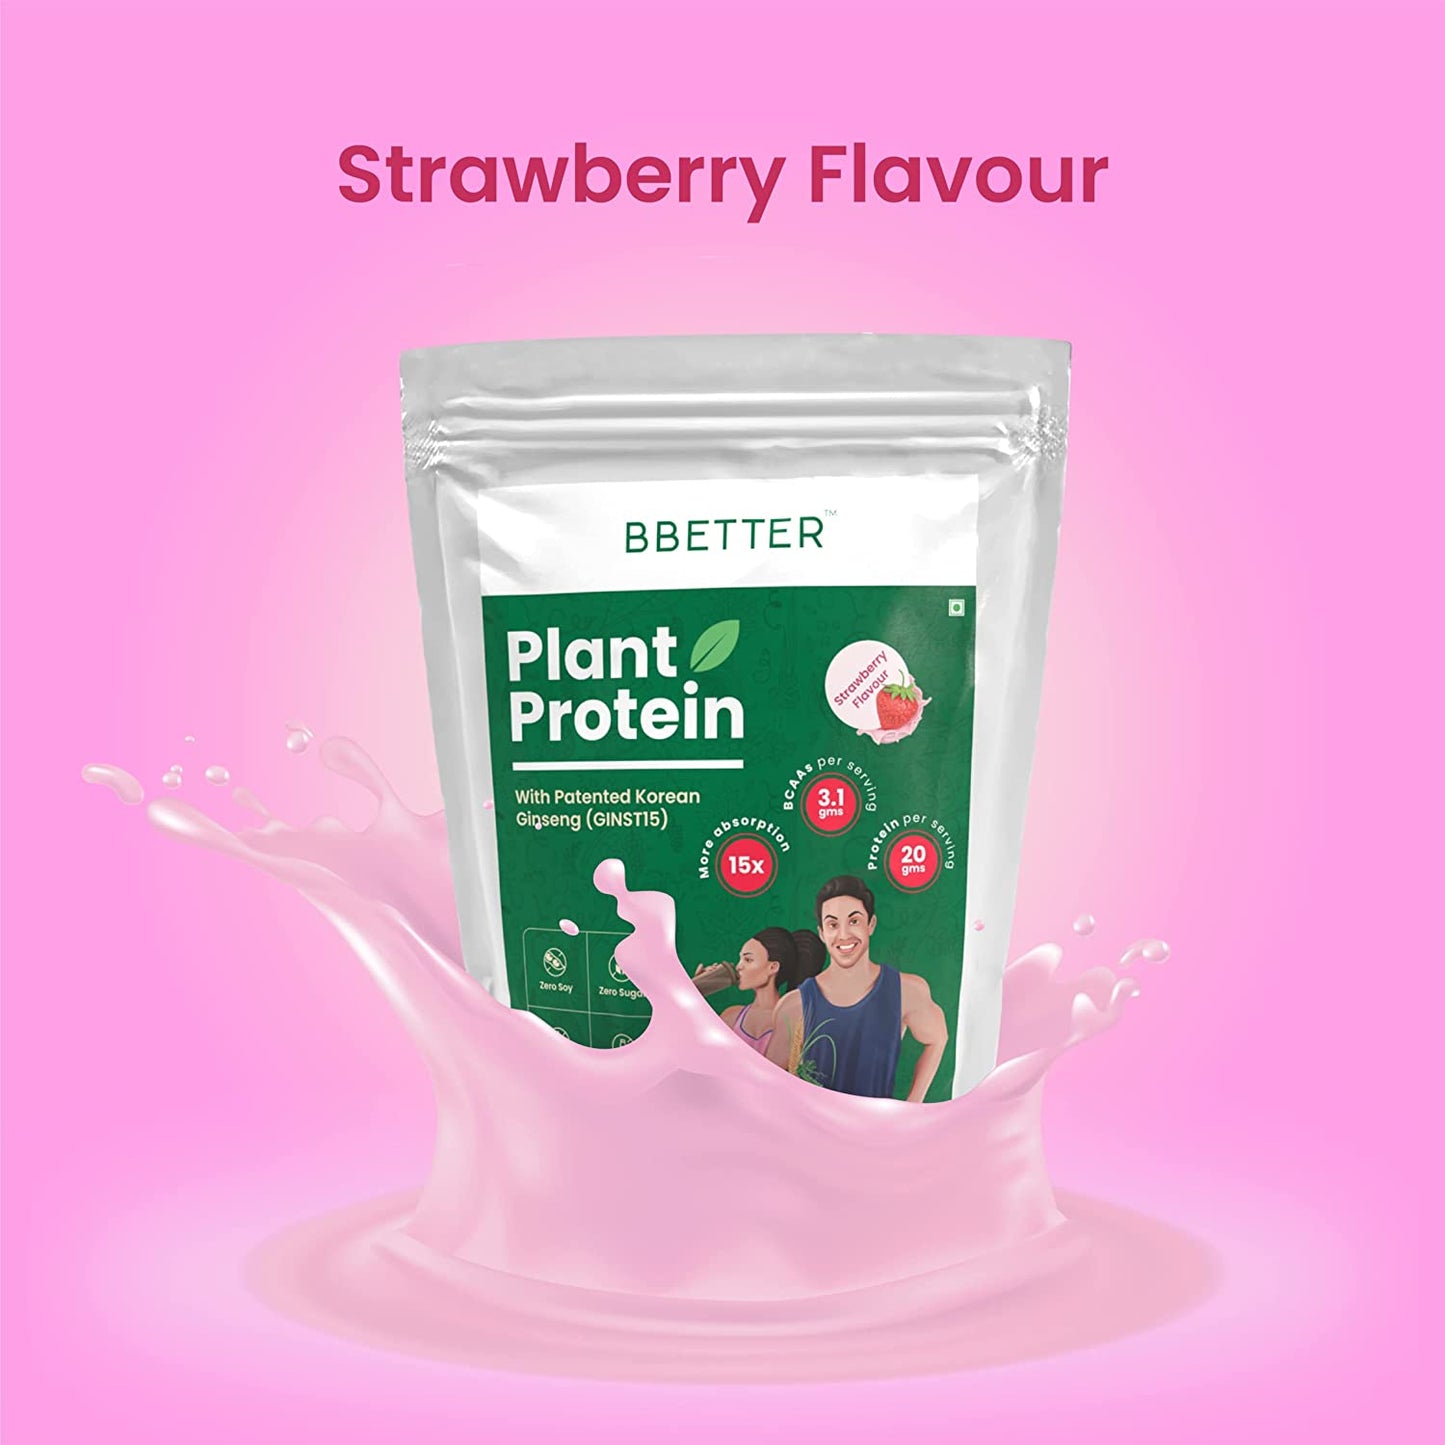 BBETTER Plant Protein for Men & Women | Enriched with Patented Korean Ginseng | 100% Vegan Protein Powder with NO ADDED SUGAR | Whey Protein Alternative with 20g Protein per serving | Strawberry Flavour